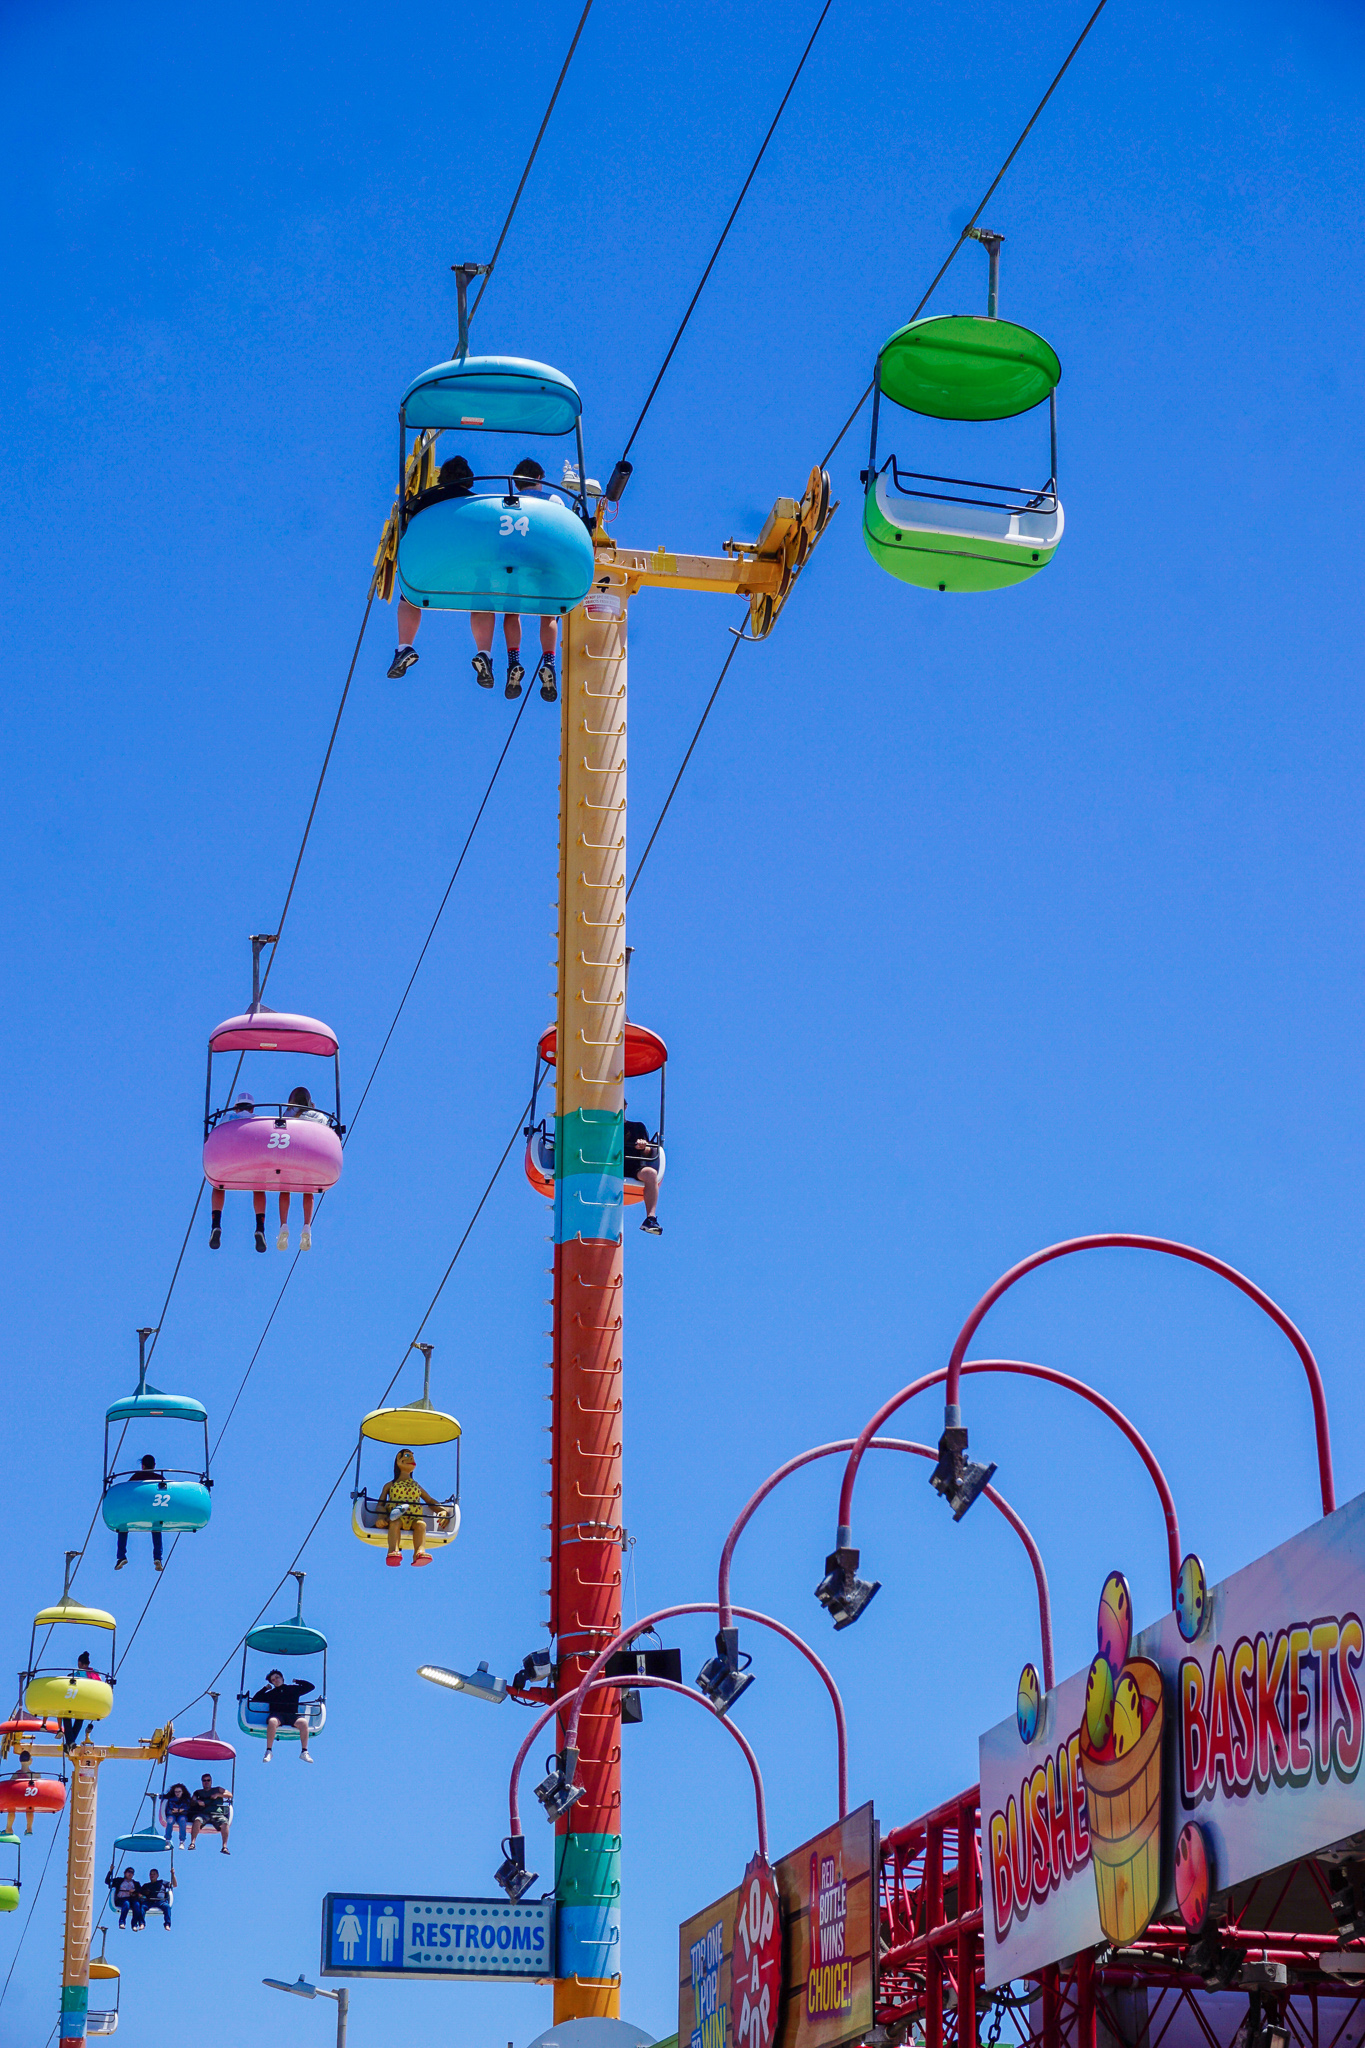 Untitled. "Santa Cruz California Amusement Park this summer." © Gabriela Timo, Argentina, entry, Open Competition, Motion, 2023 Sony World Photography Awards